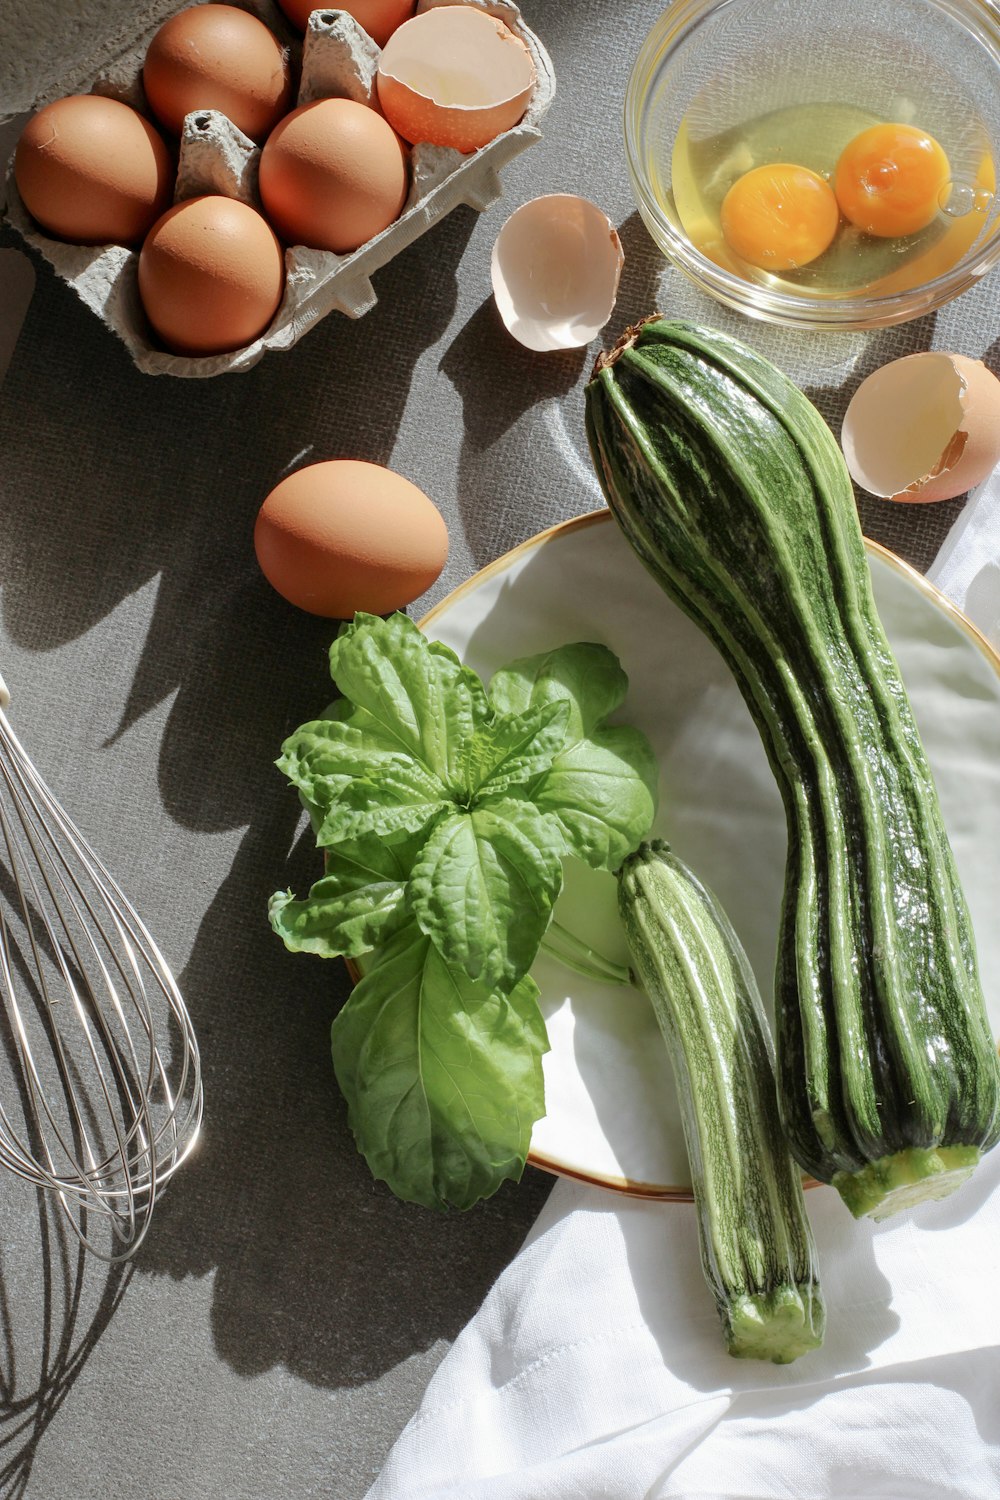 a plate with cucumbers, eggs, and a whisk on it